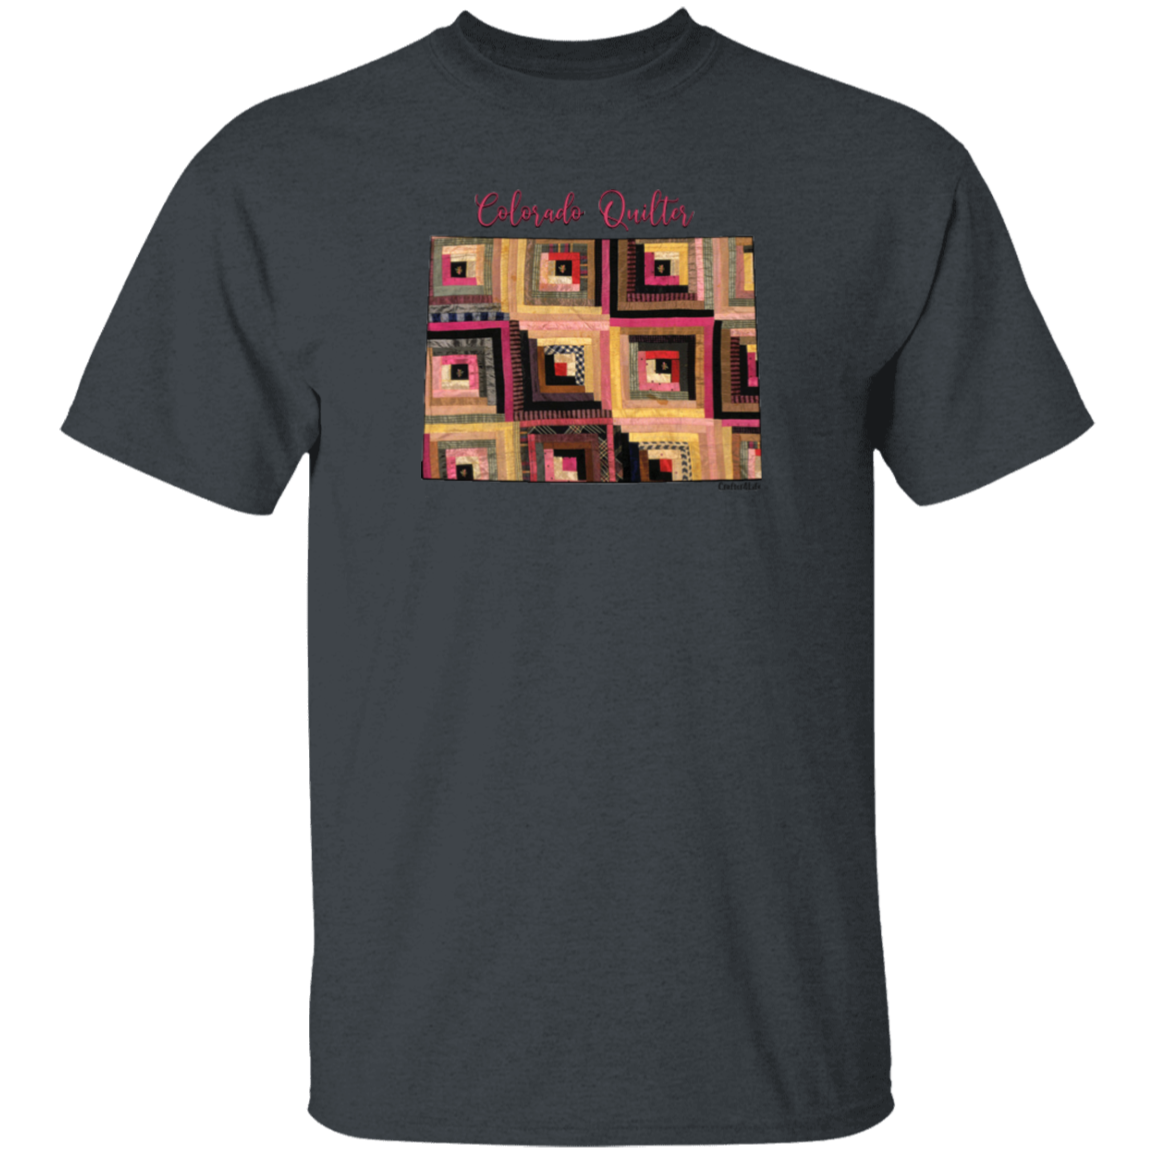 Colorado Quilter T-Shirt, Gift for Quilting Friends and Family